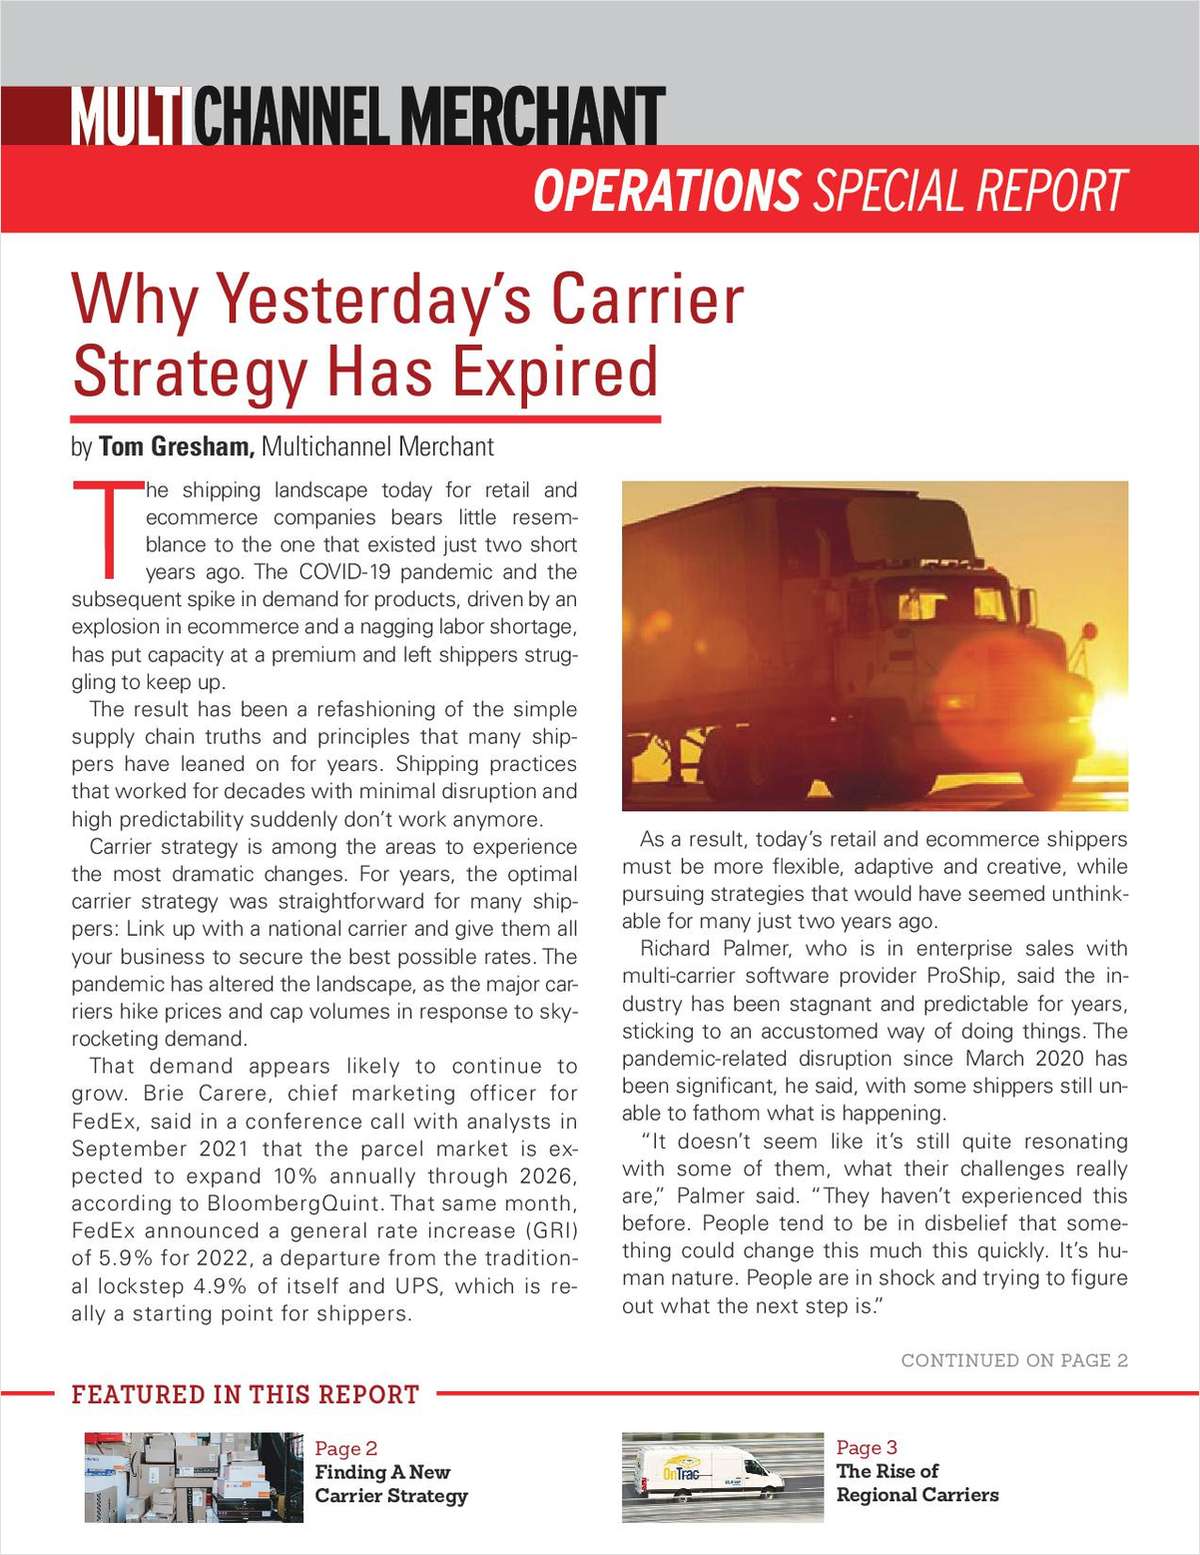 Why Yesterday’s Carrier Strategy Has Expired